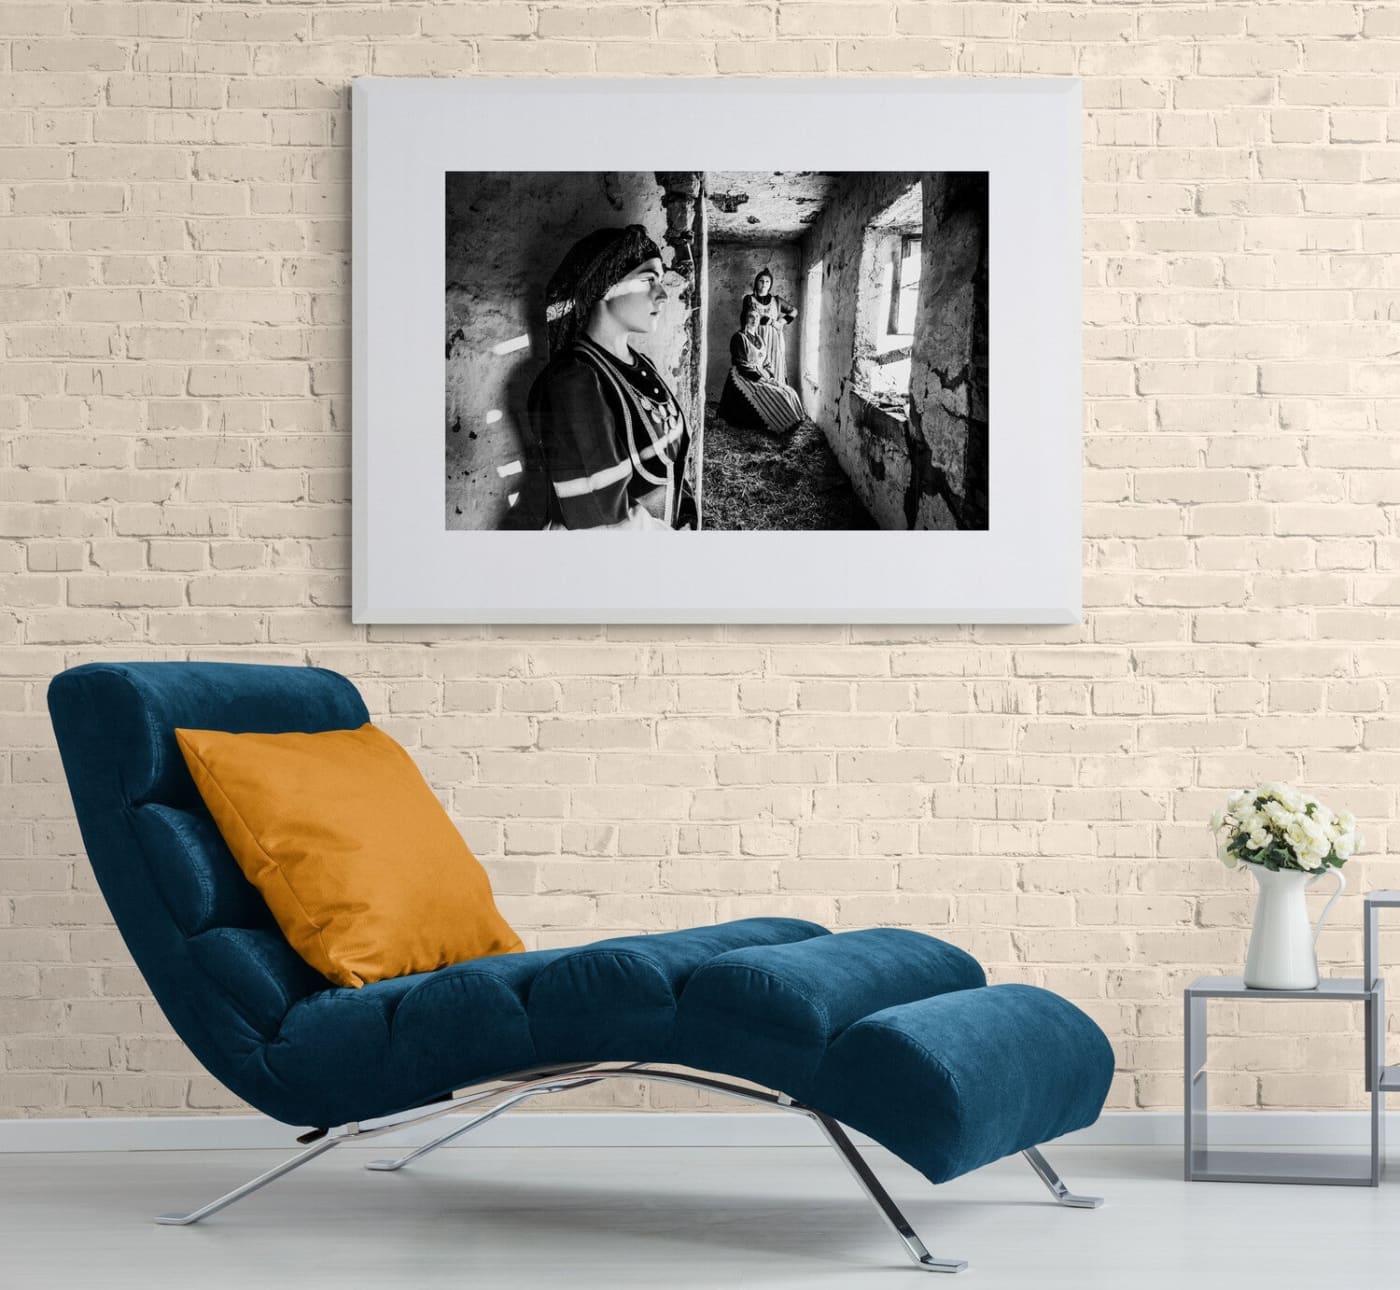 Black and White Photography Wall Art Greece | Limited Edition numbered signed. Rural costumes of Kastoria W. Macedonia